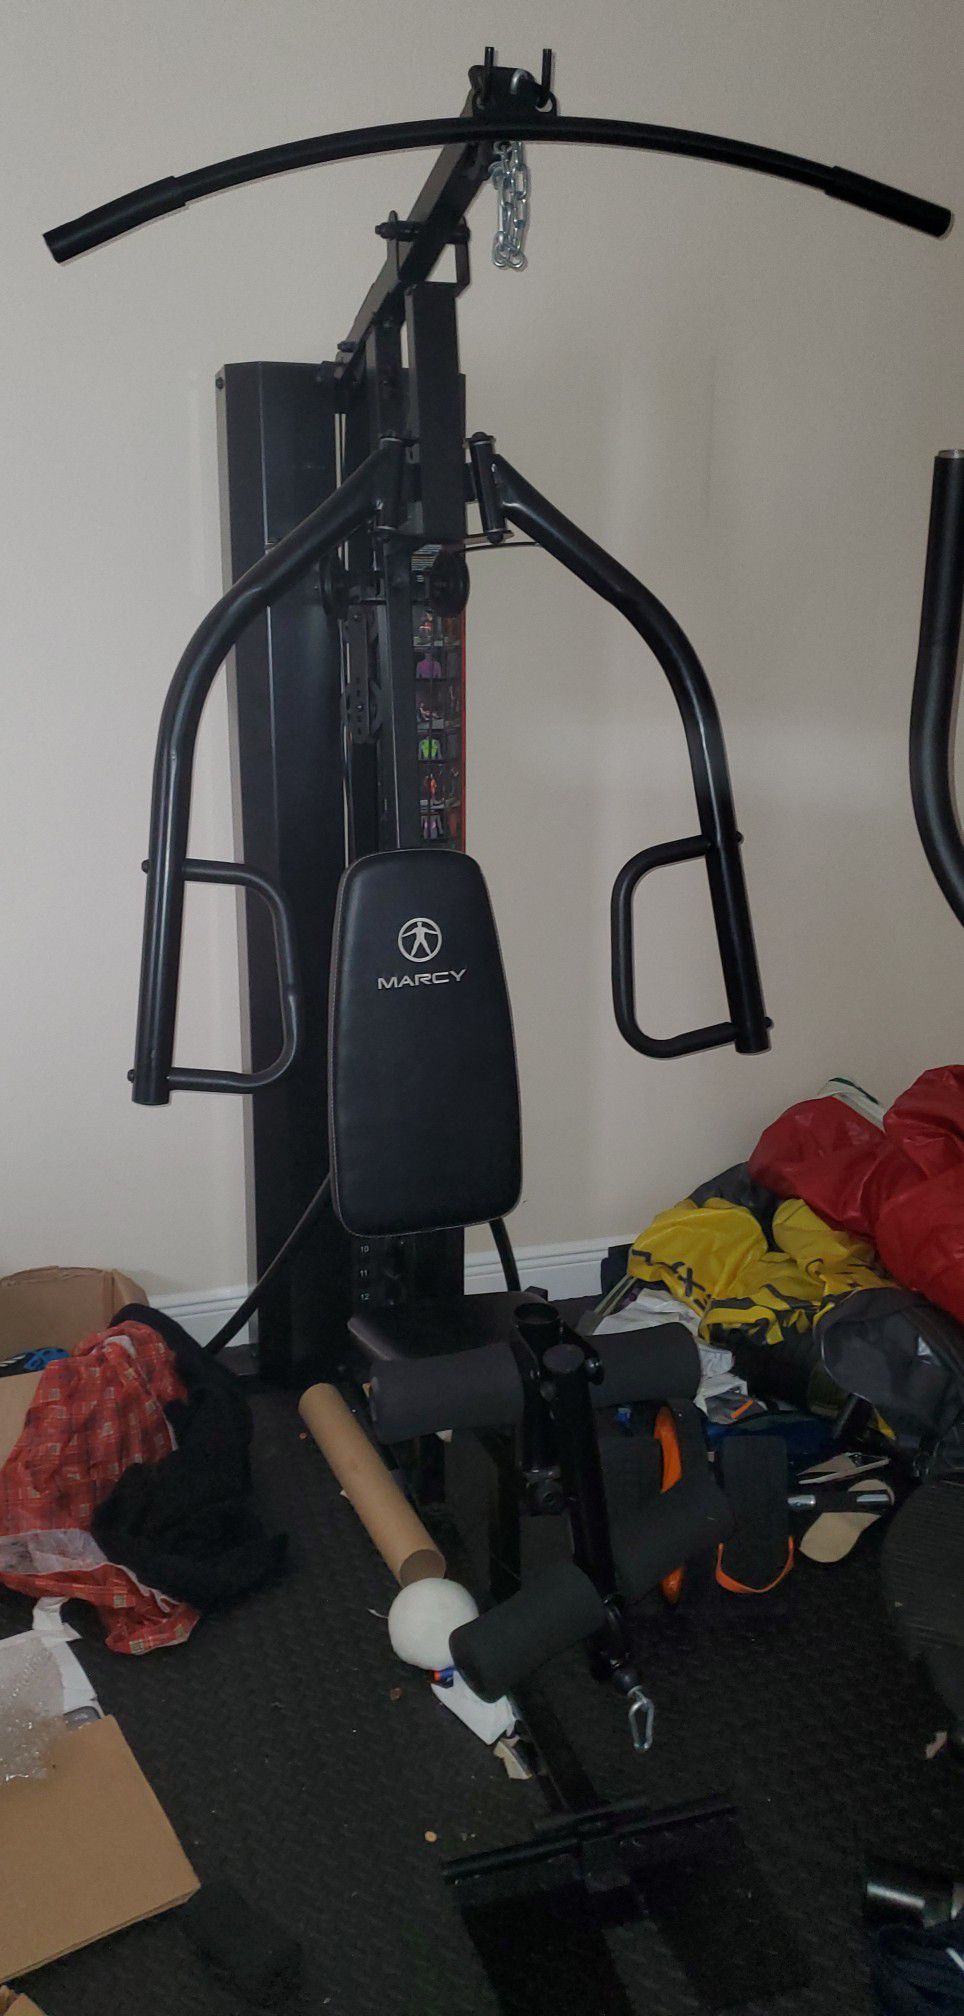 Marcy Pro Home Gym System